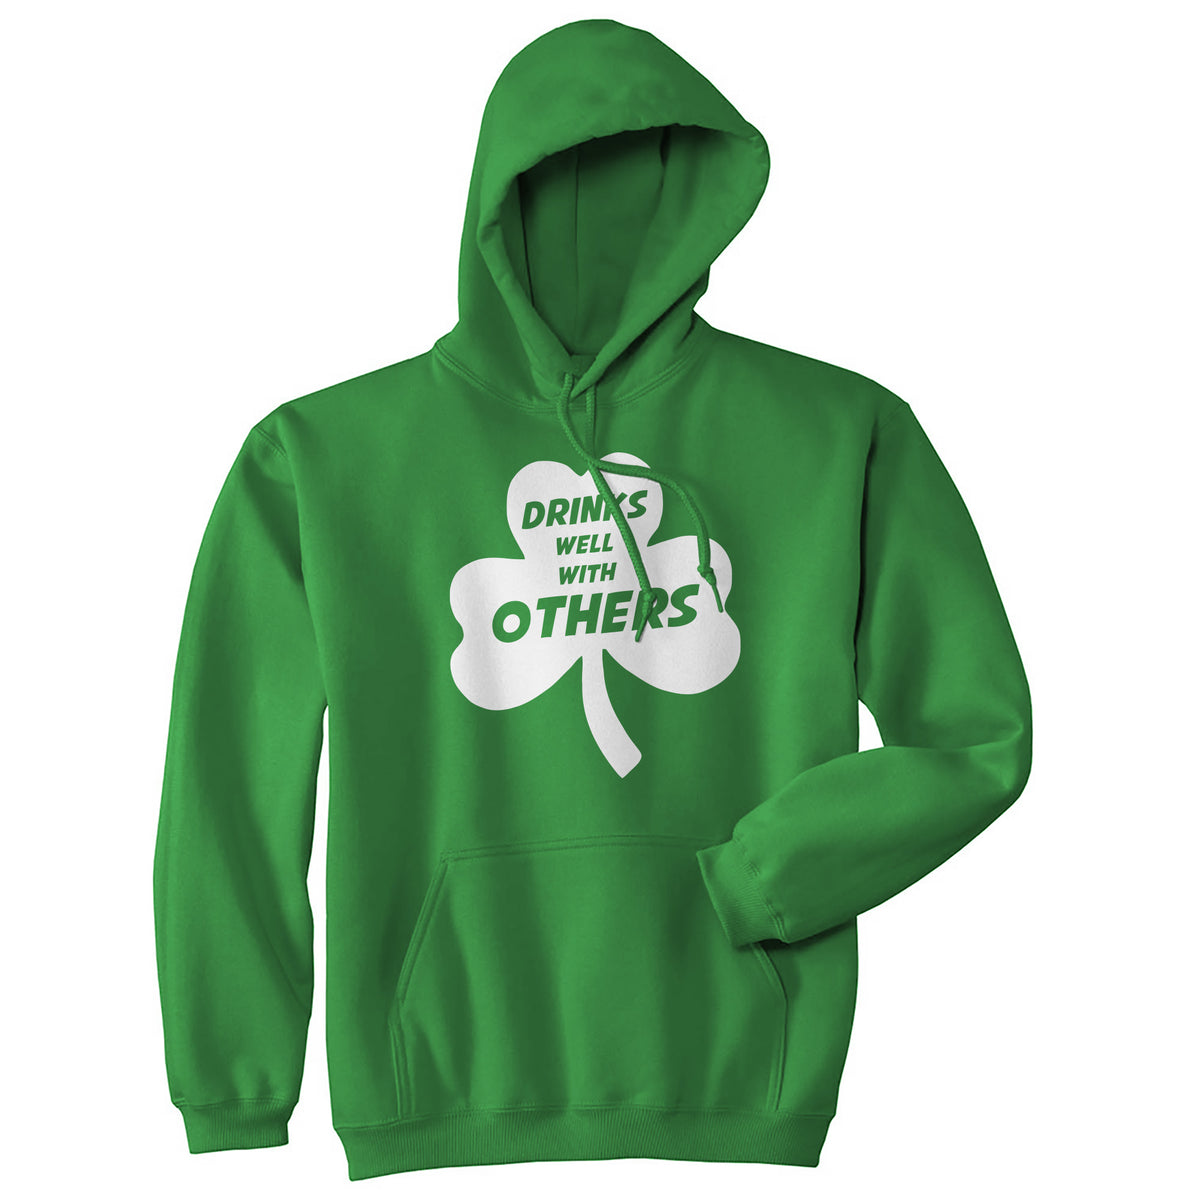 Funny Green - Drinks Well Drinks Well With Others Hoodie Nerdy Saint Patrick&#39;s Day Drinking Tee